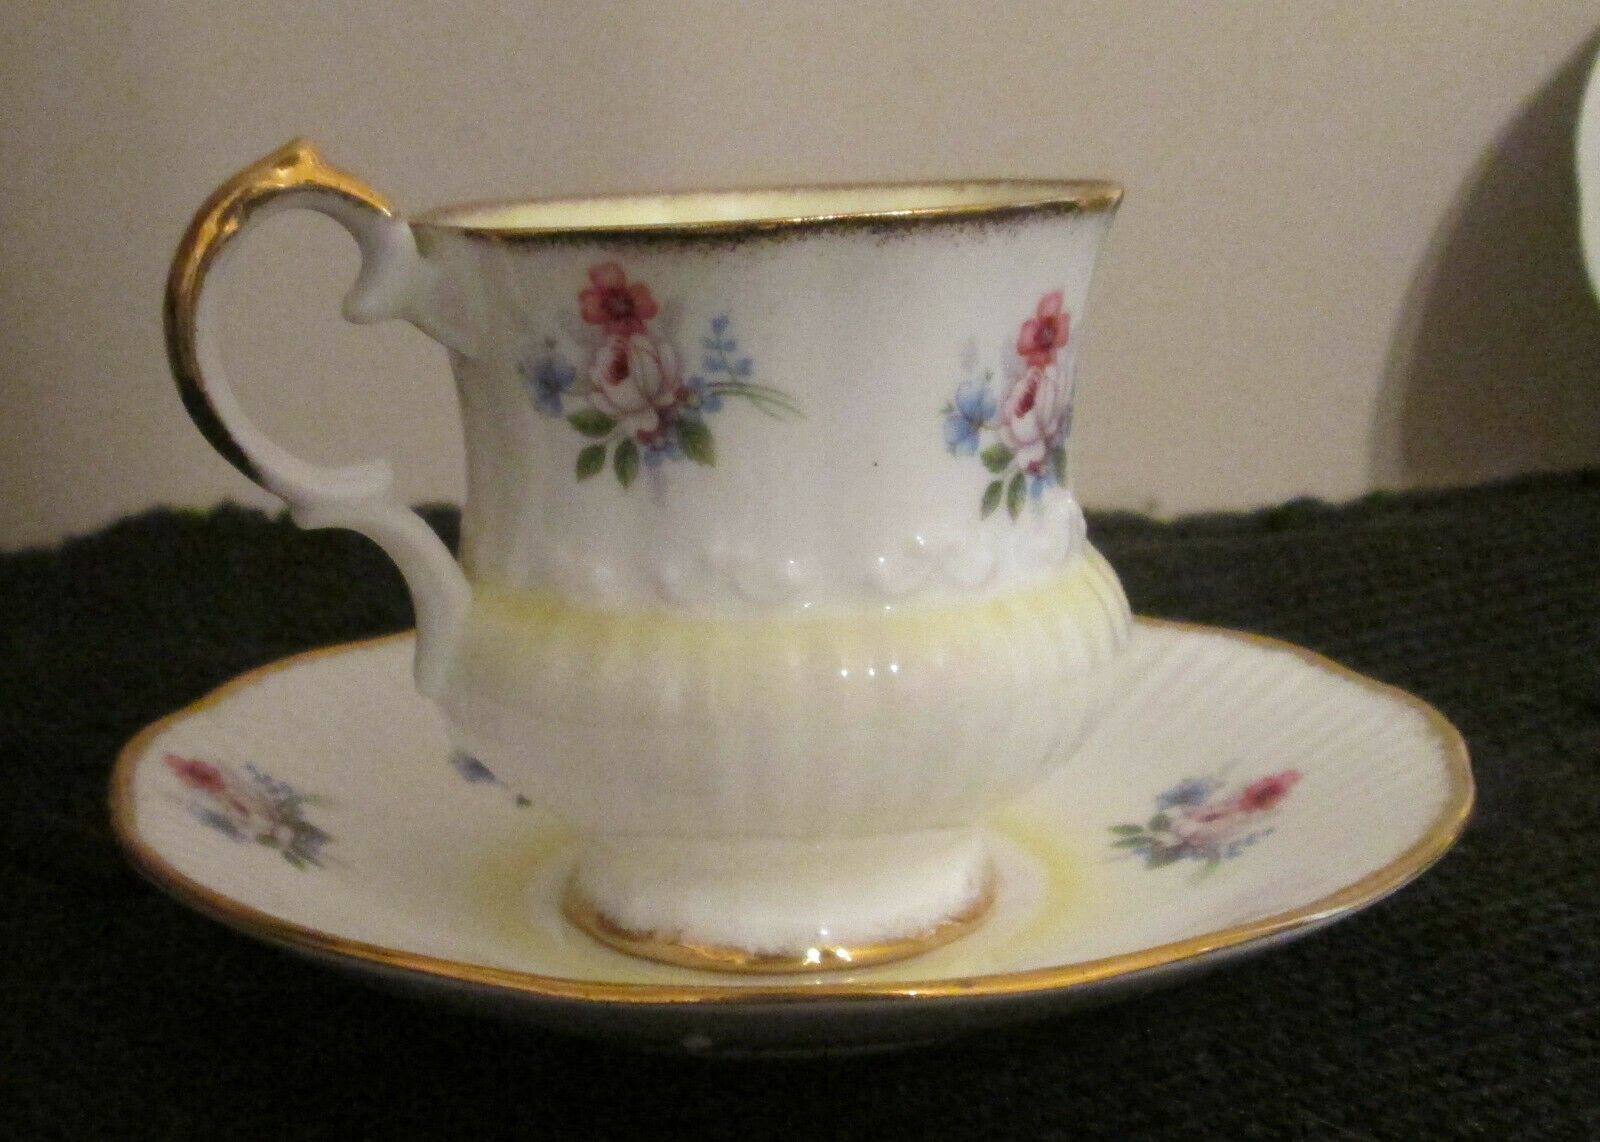 Elizabethan Fine Bone China Cup and Saucer - $14.36